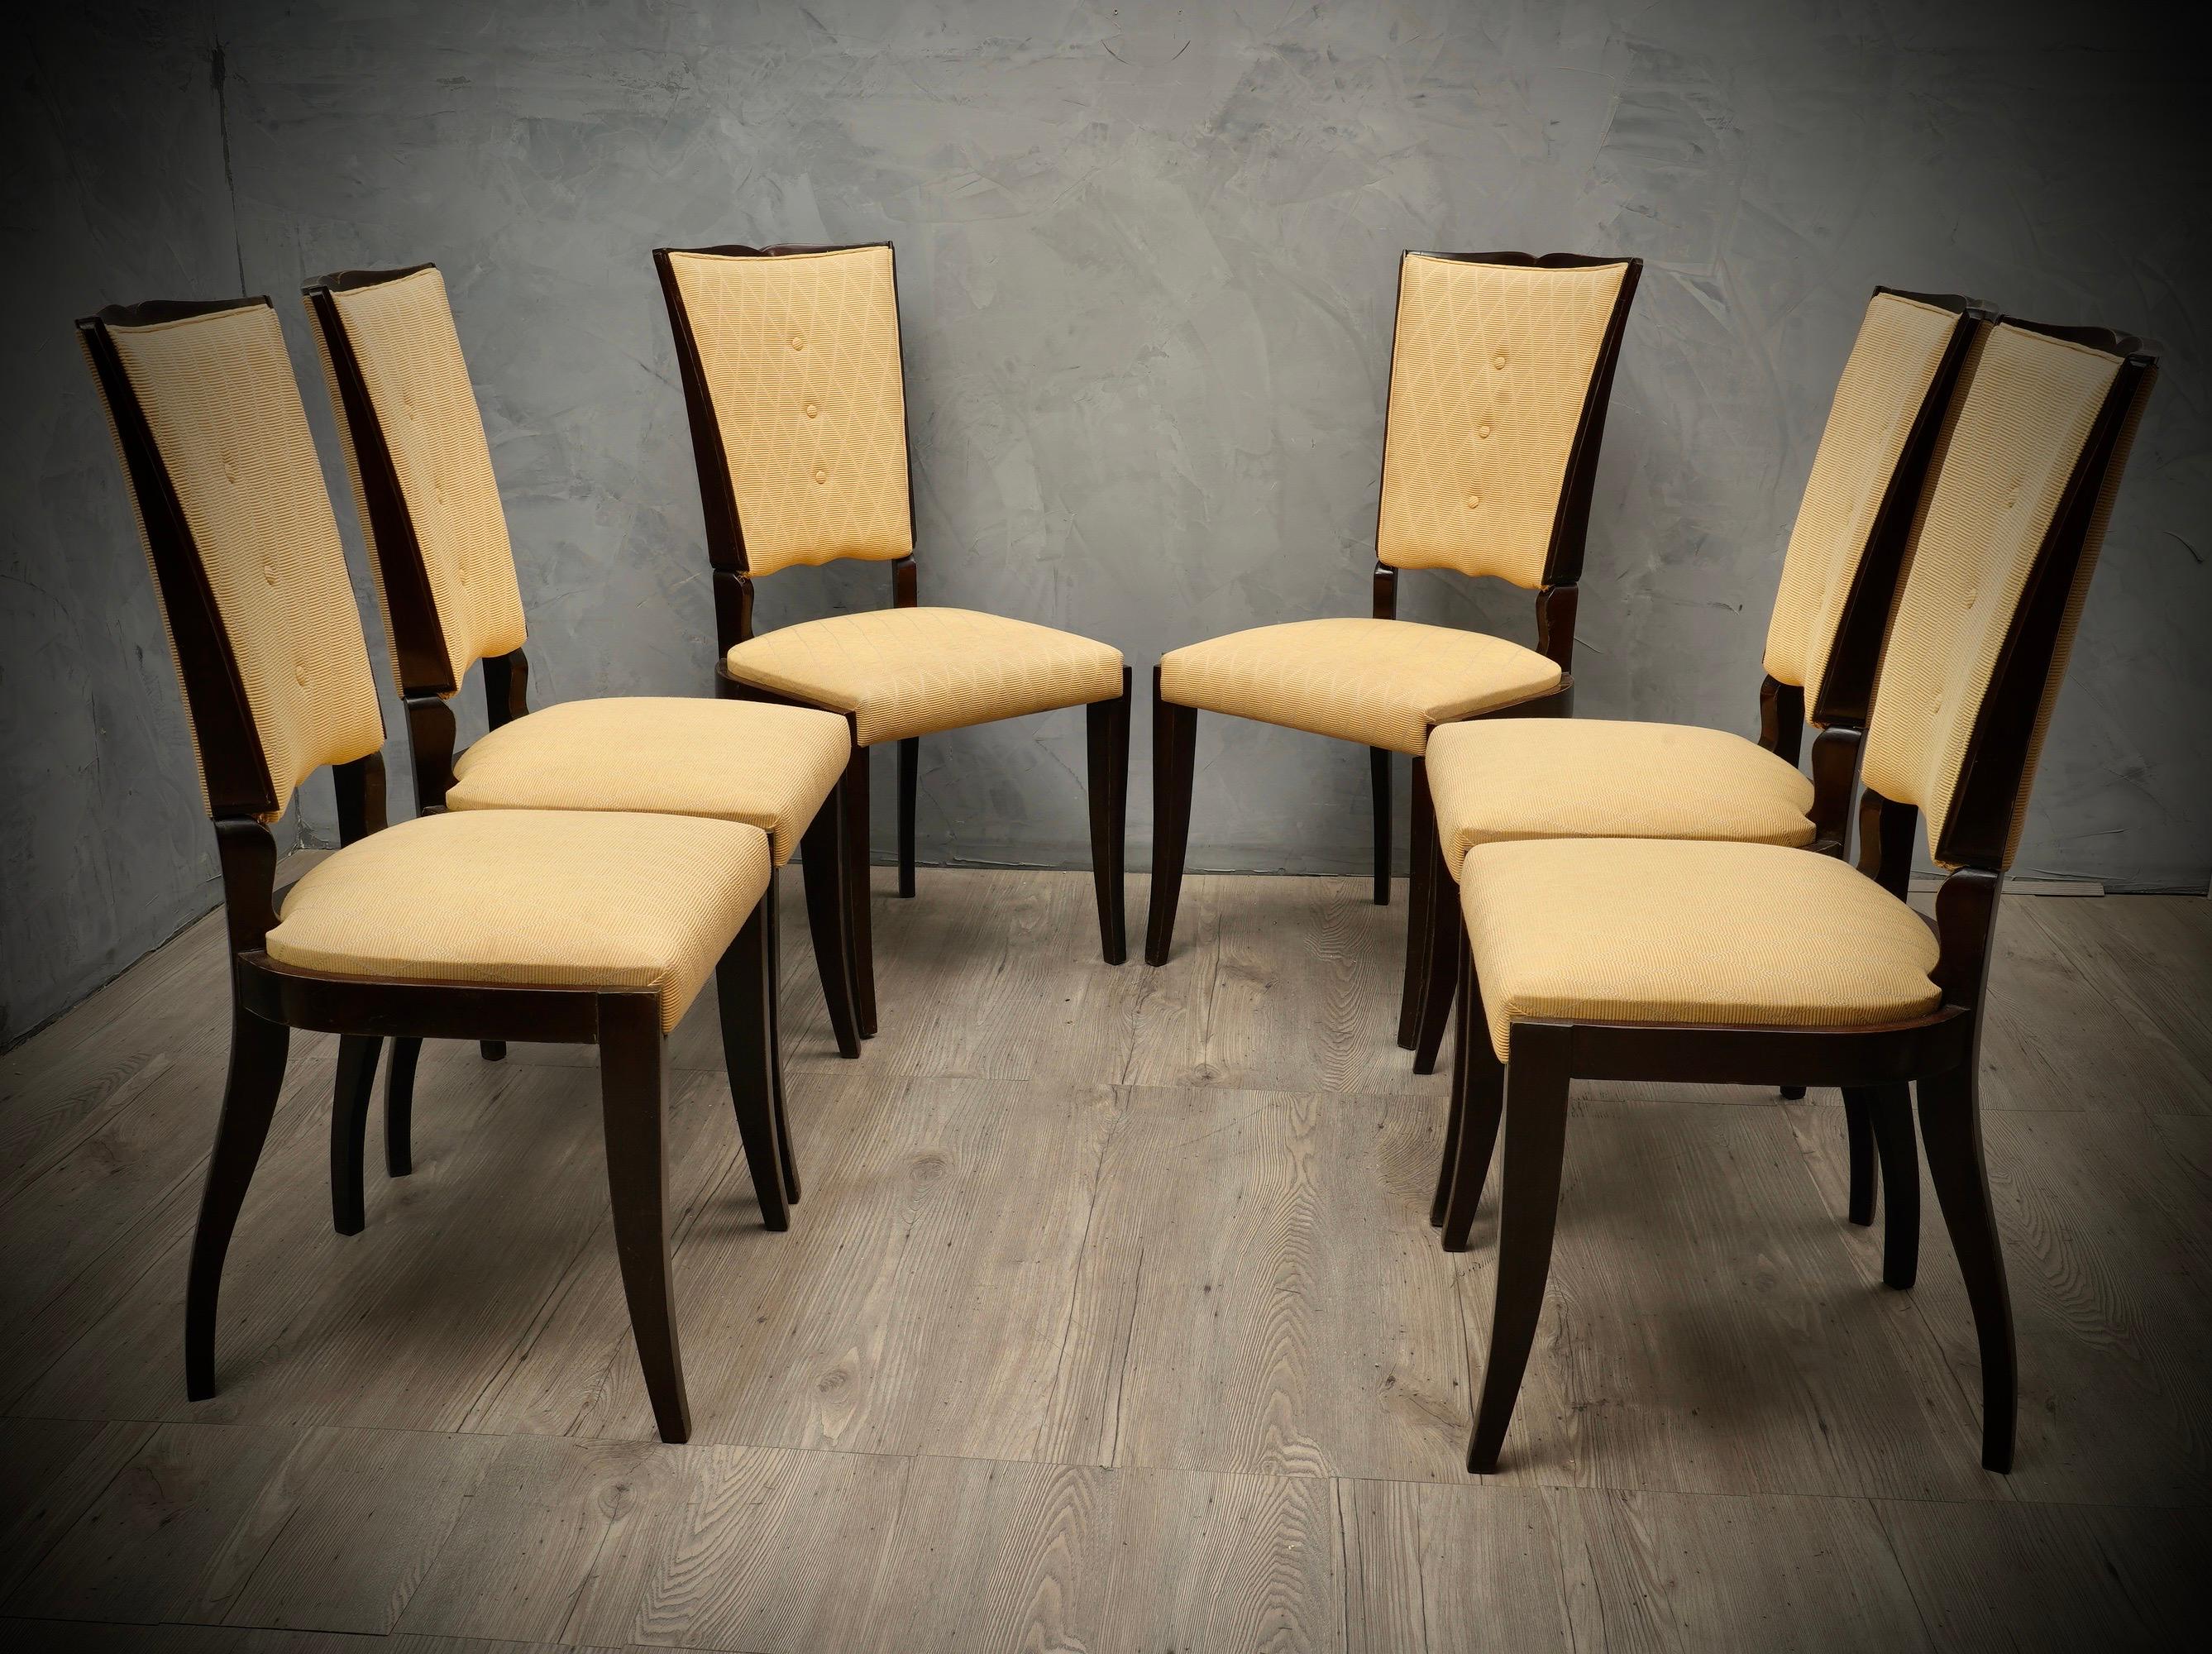 Set of six chairs in beautiful 1940s design in characteristic Italian style of Paolo Buffa, Vittorio Dassi and Osvaldo Borsani, with saber legs and shaped backrest. Originality and style for these chairs designed for classy furnishings.

The six